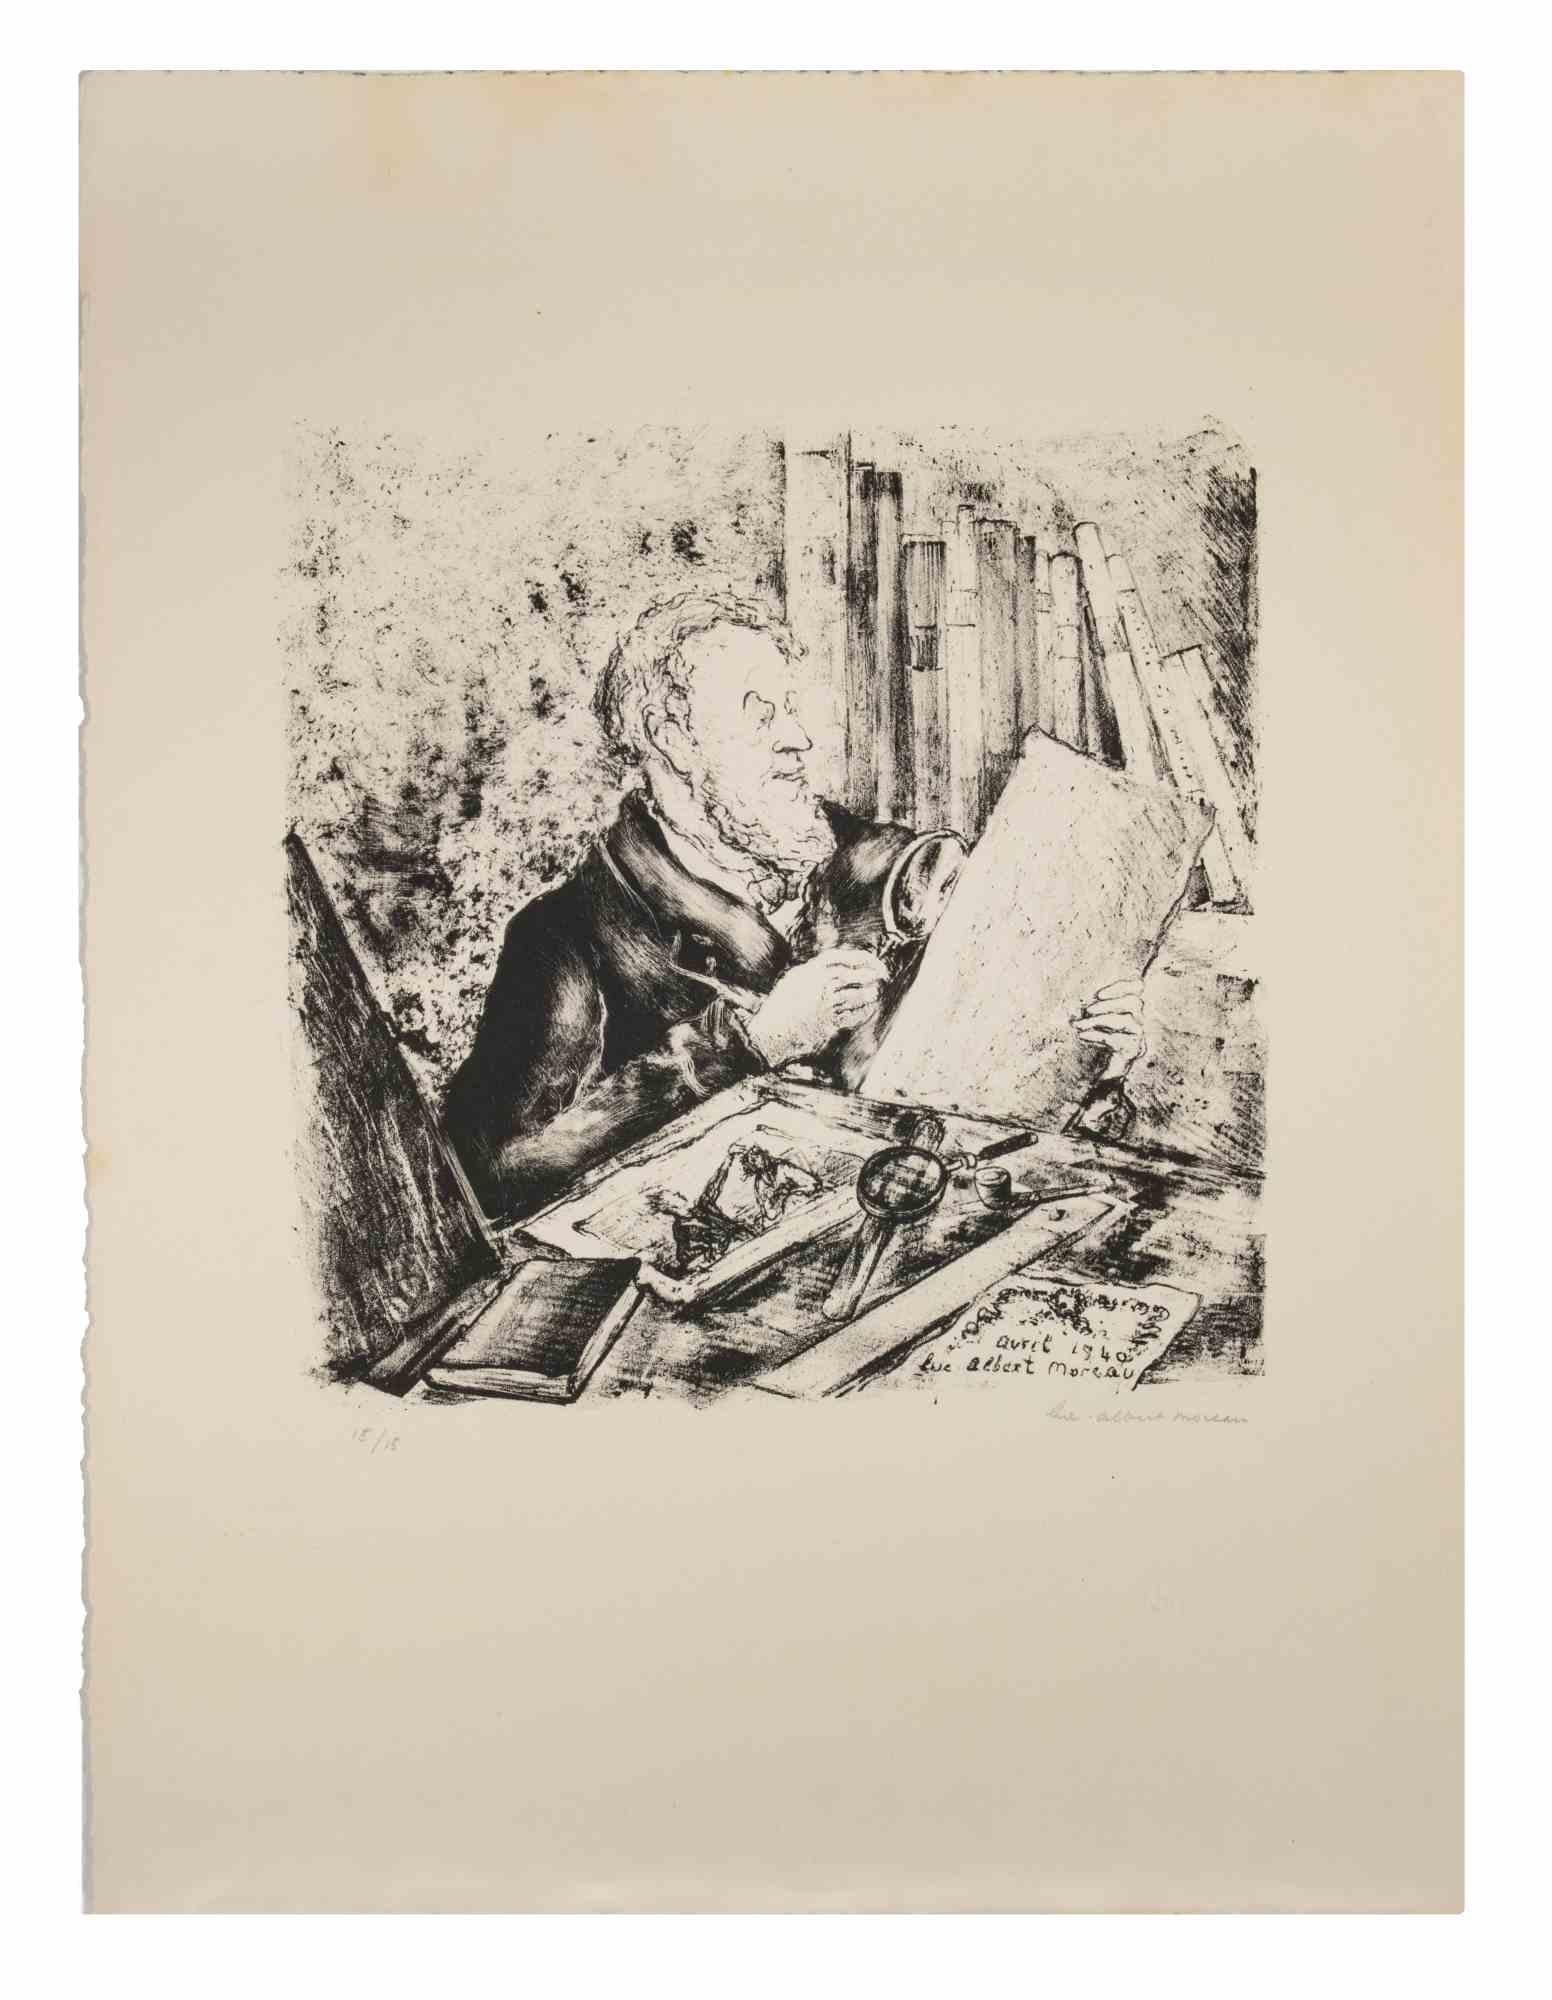 Portrait of a Man is a Lithograph on ivory-colored paper realized by Luc Albert Moreau in 1940.

The artwork is in good condition.

Hand-signed and dated on the lower right corner, numbered on the left.

Luc-Albert Moreau (1882-1948) is a French